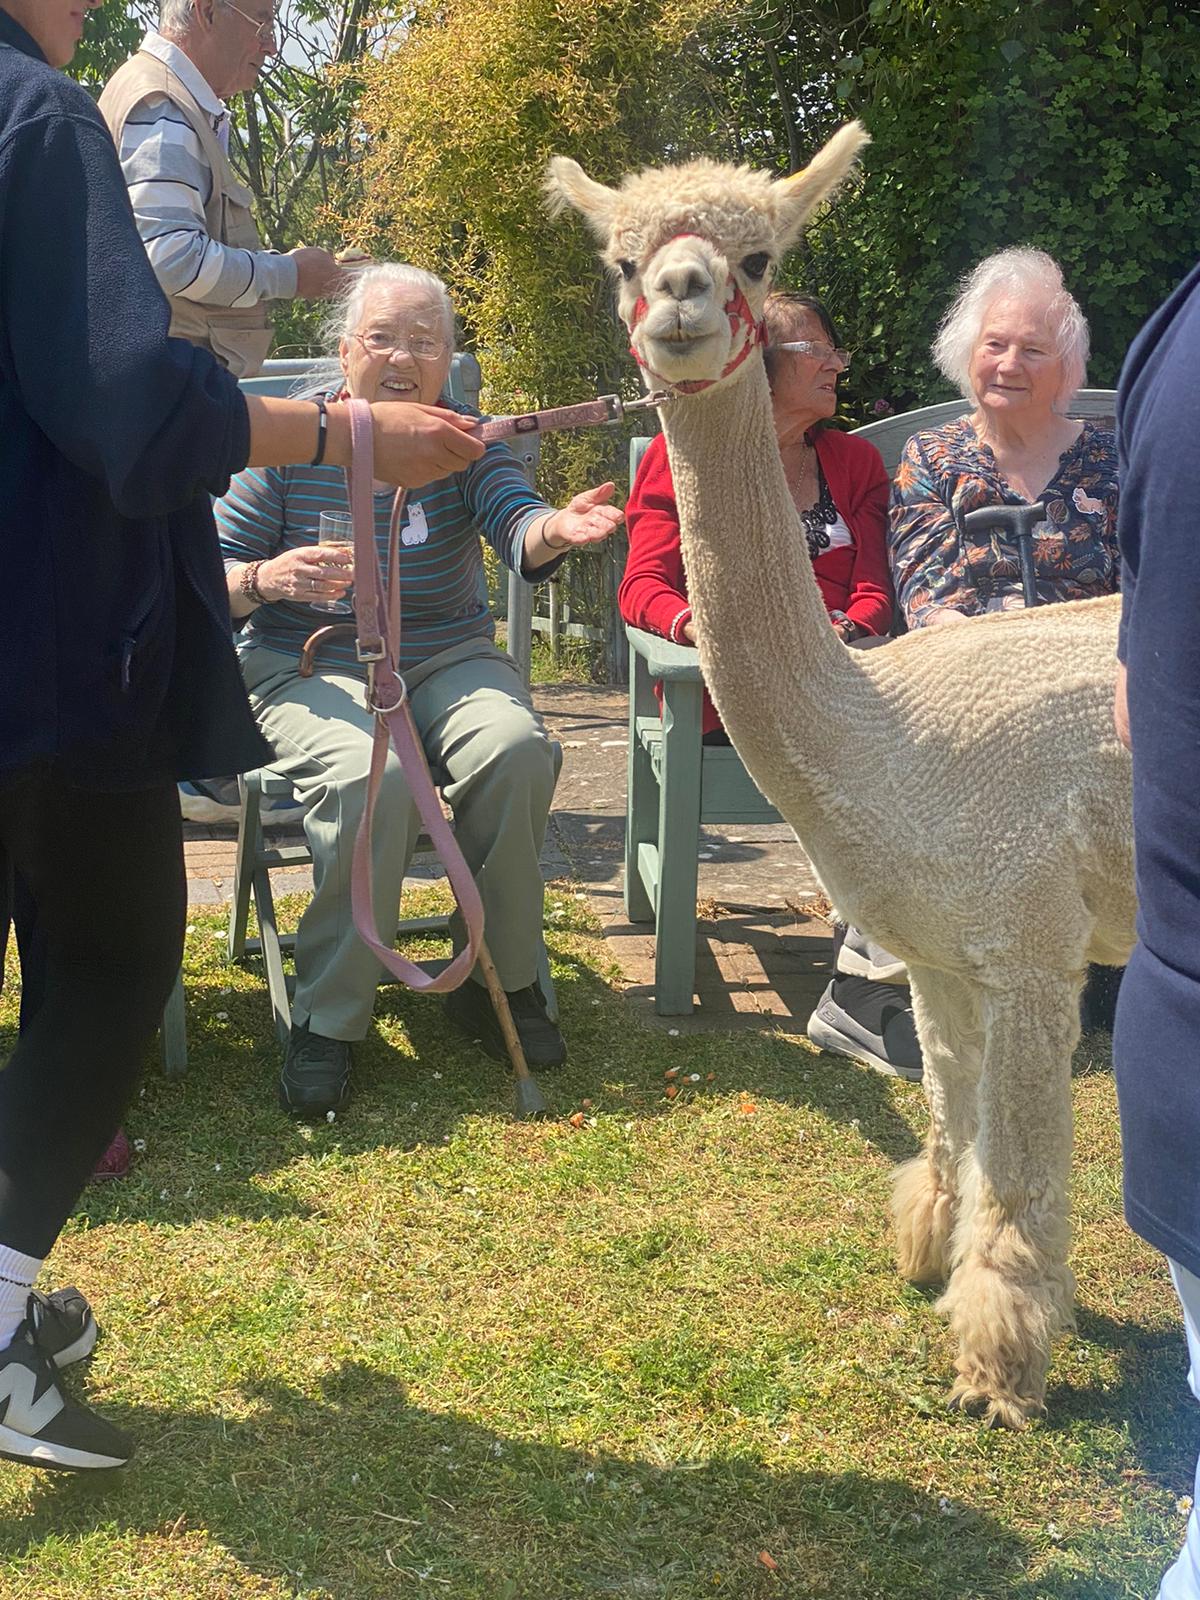 Quality Care Services | Some of the alpacas showed a cheeky spirit!